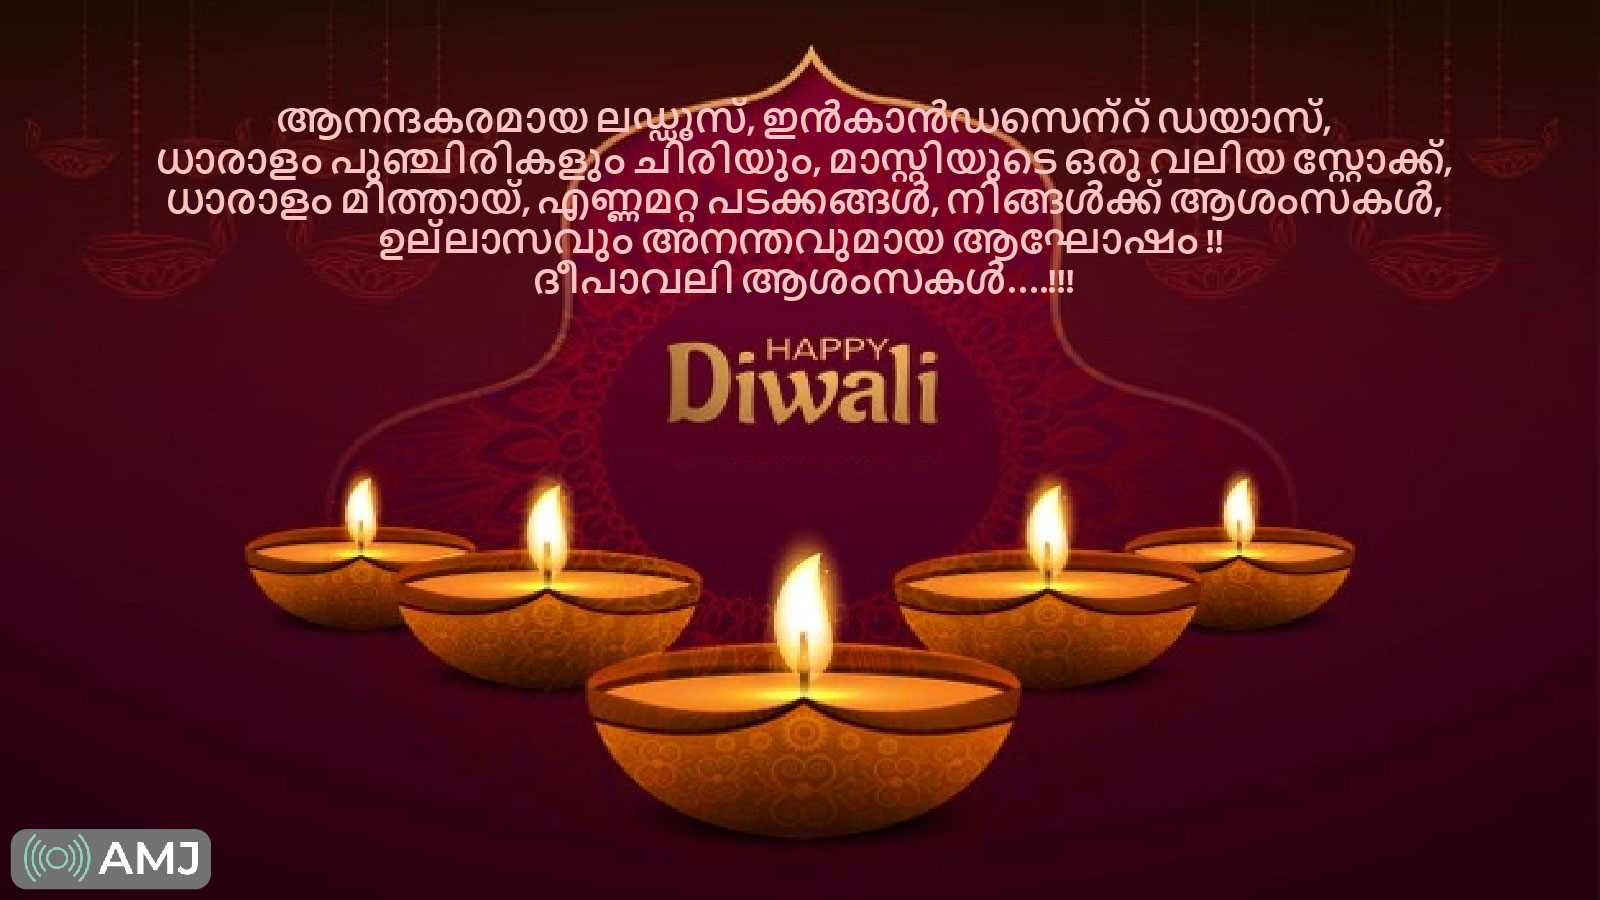 Diwali Messages in Malayalam